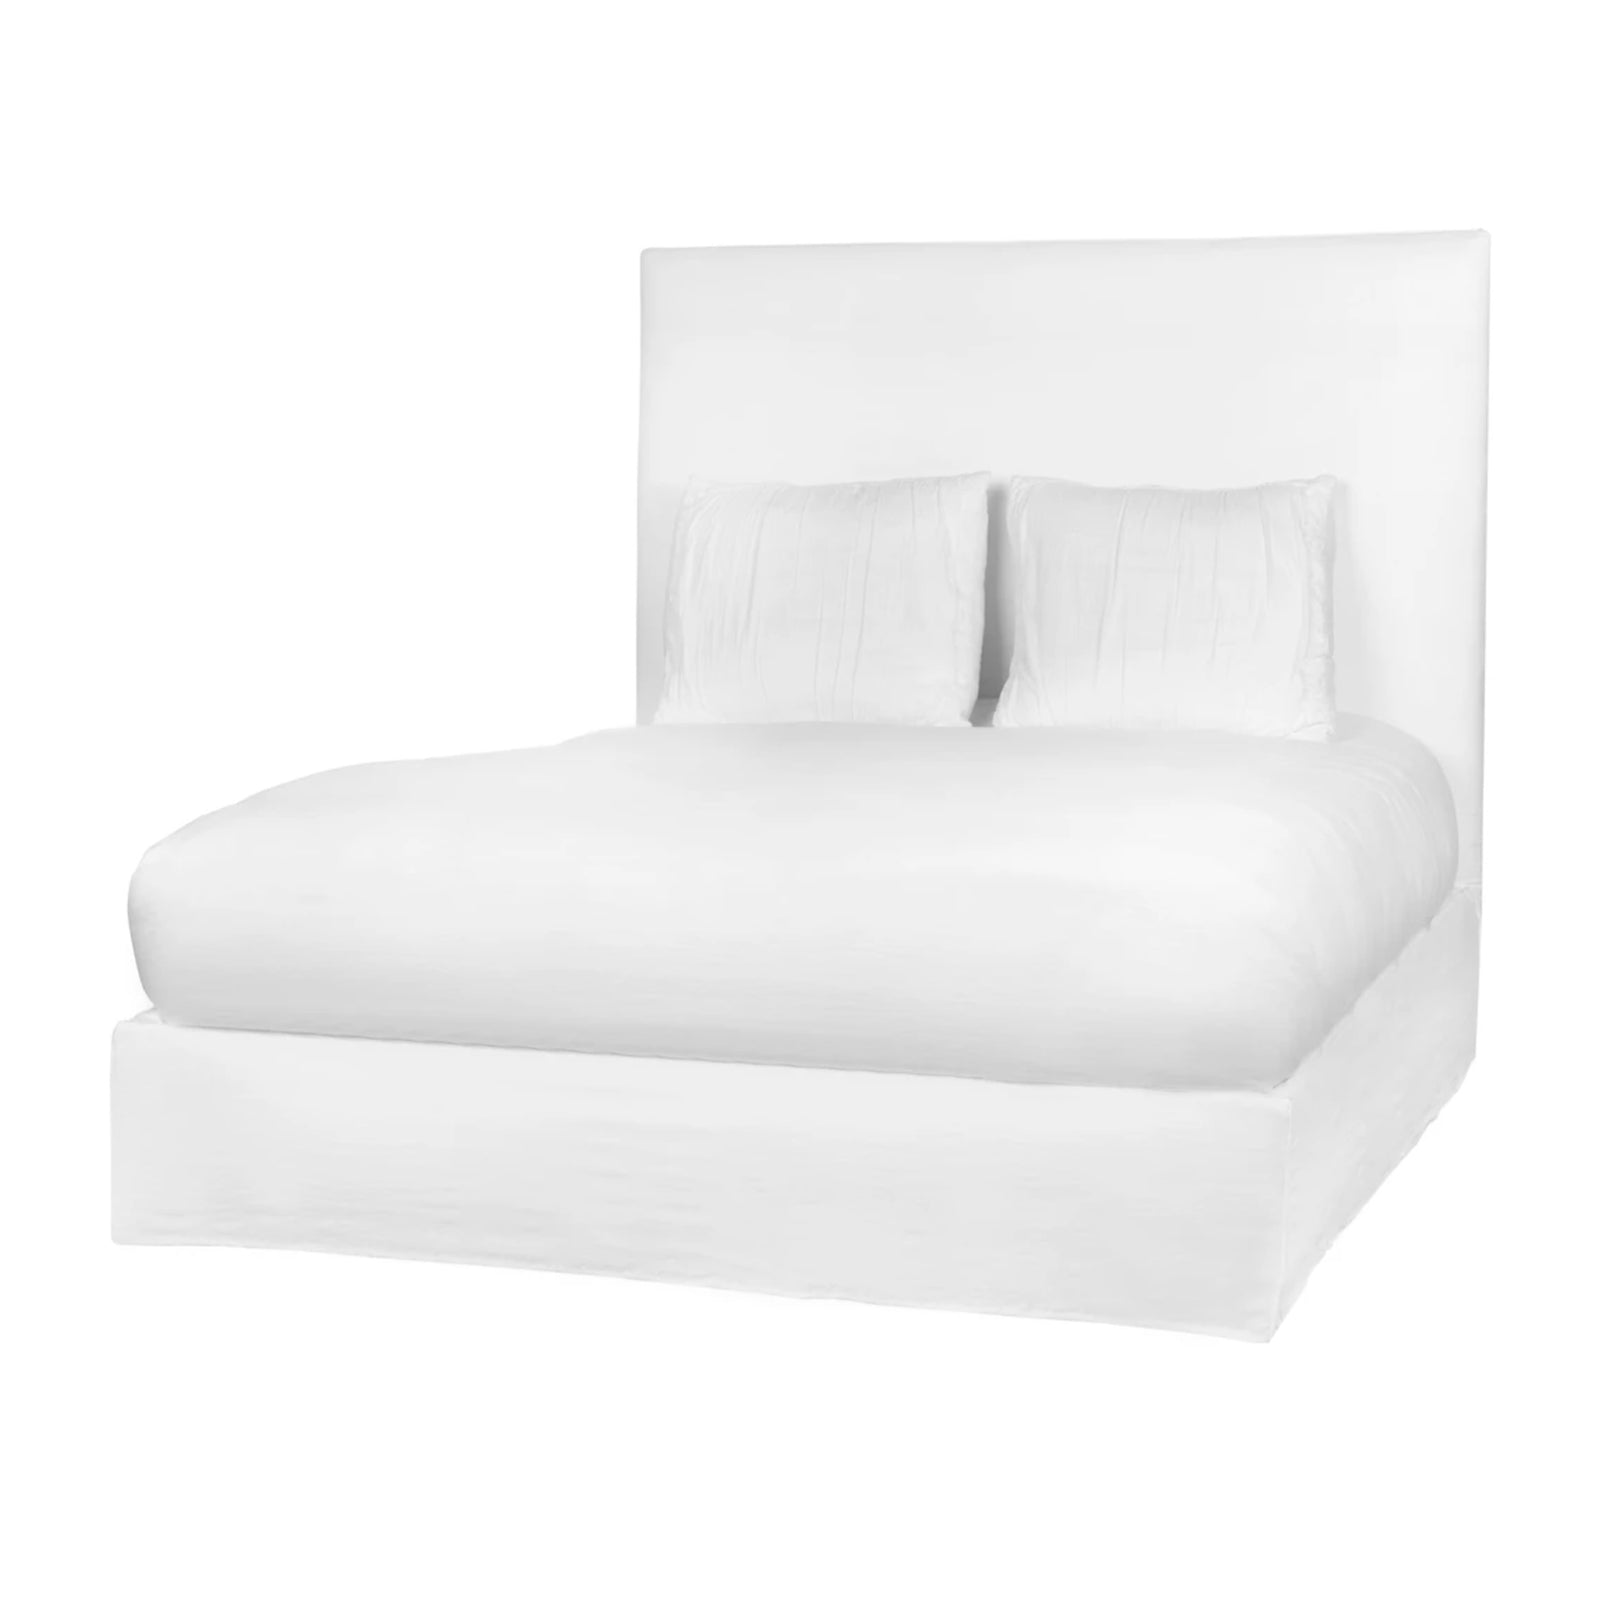 April Tall Bed by Cisco Home